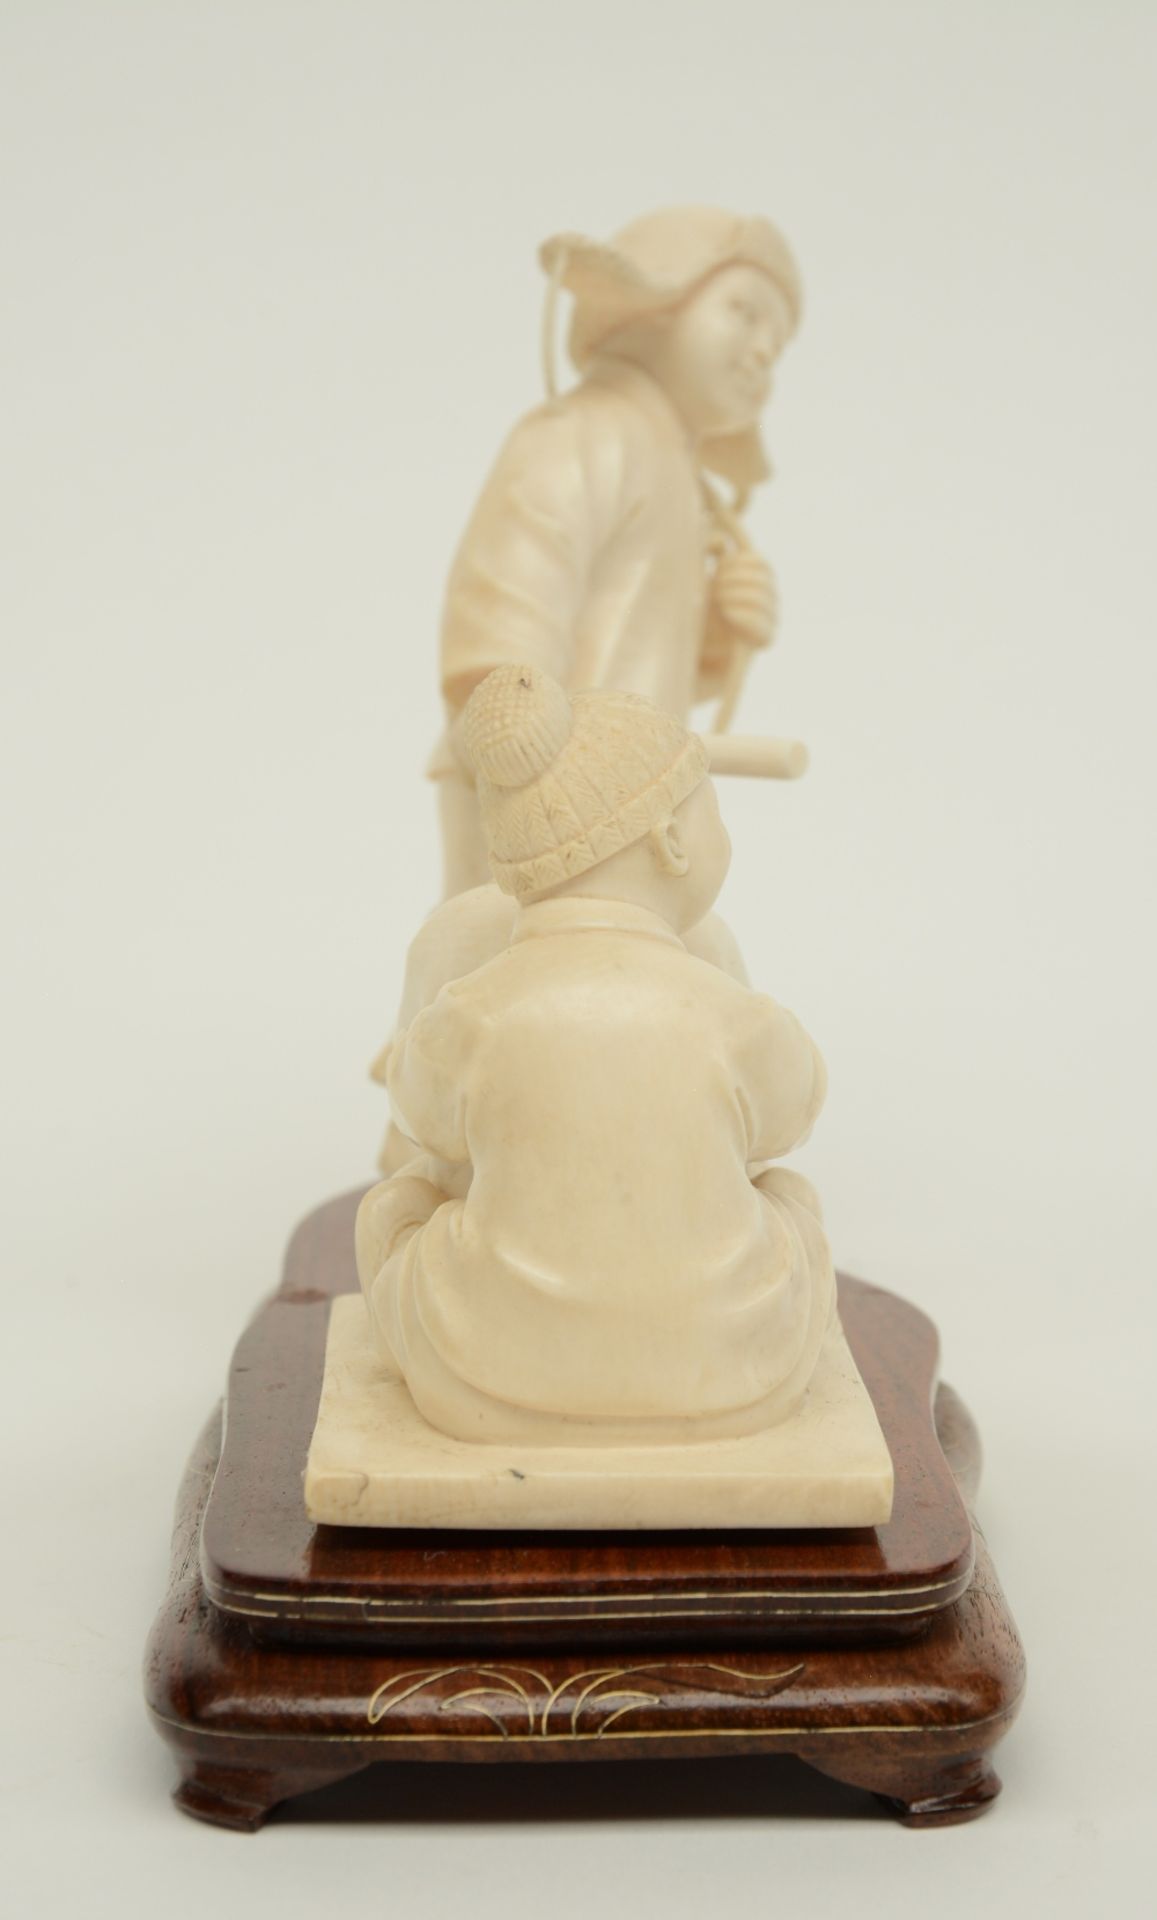 A Chinese ivory group depicting a winter scene with playing children, first half 20thC, H 7,5 - 12,4 - Image 4 of 6